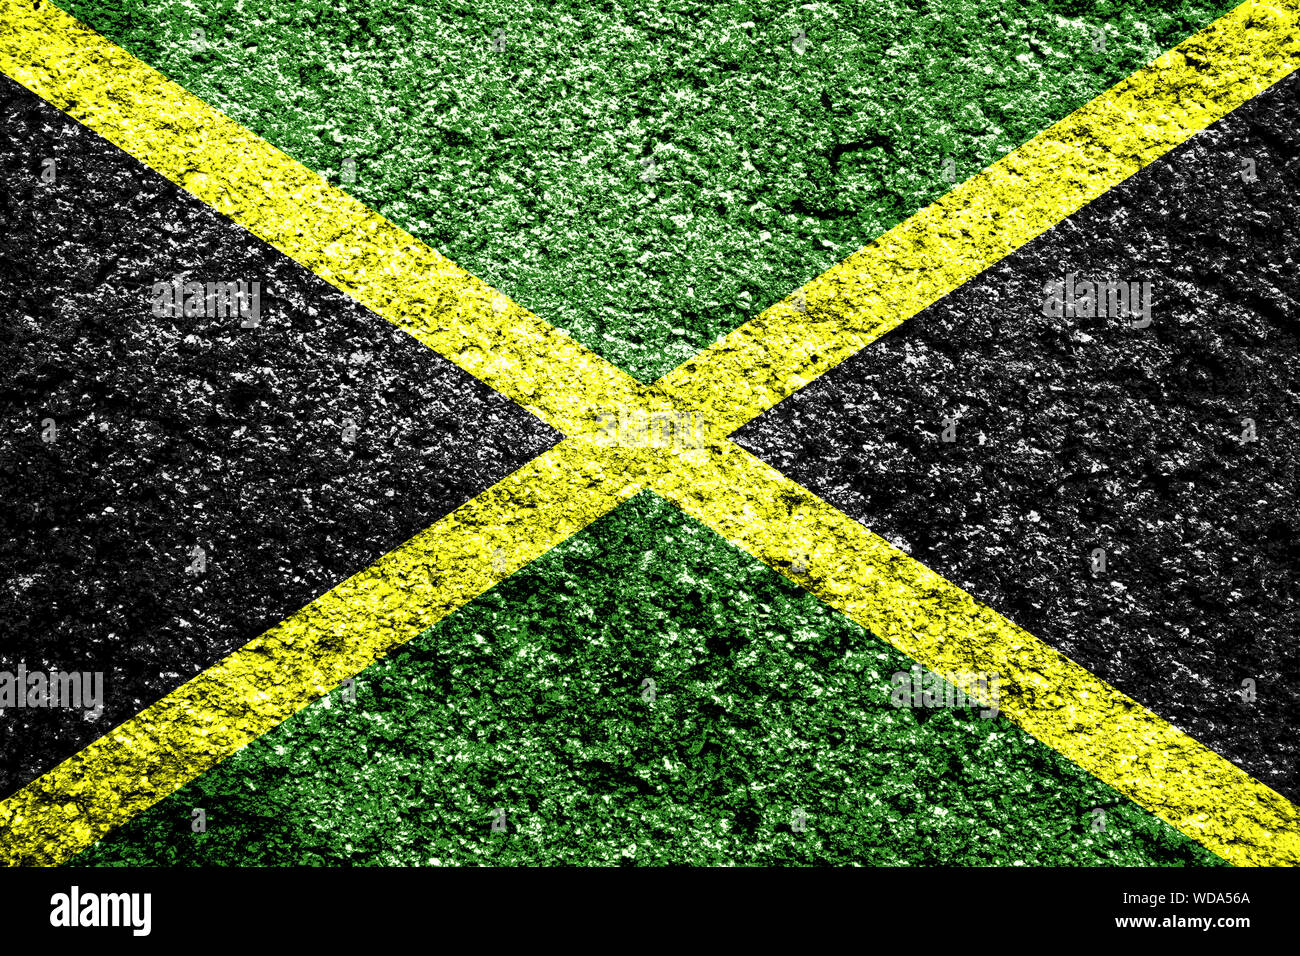 Jamaica flag with a grungy distressed worn texture illustration Stock Photo